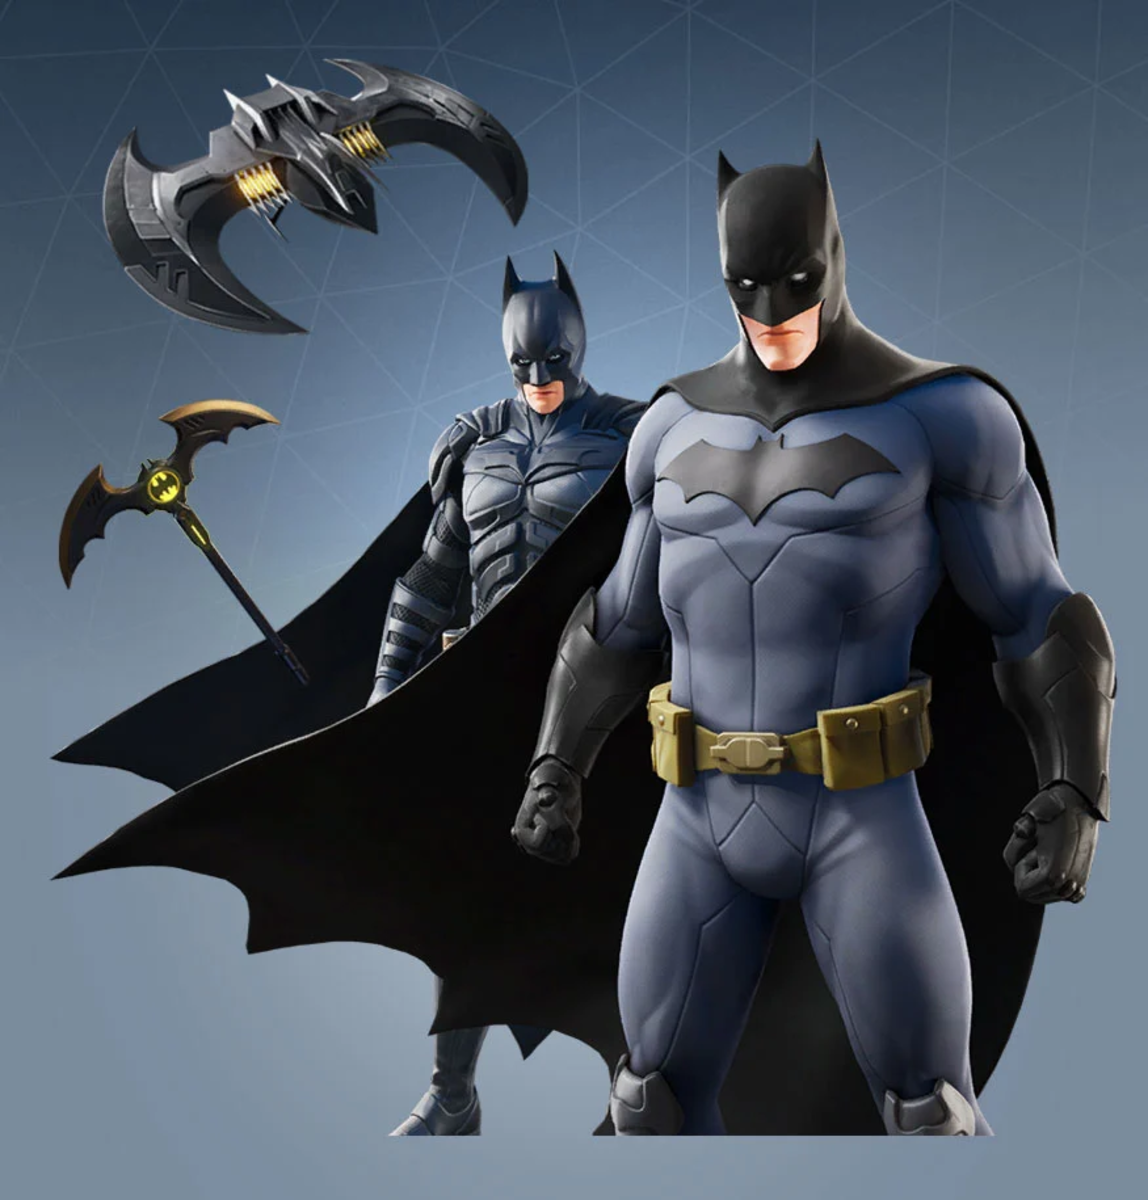 last seen on 10/06/2019. Caped Crusader Bundle Cost $19.99 USD